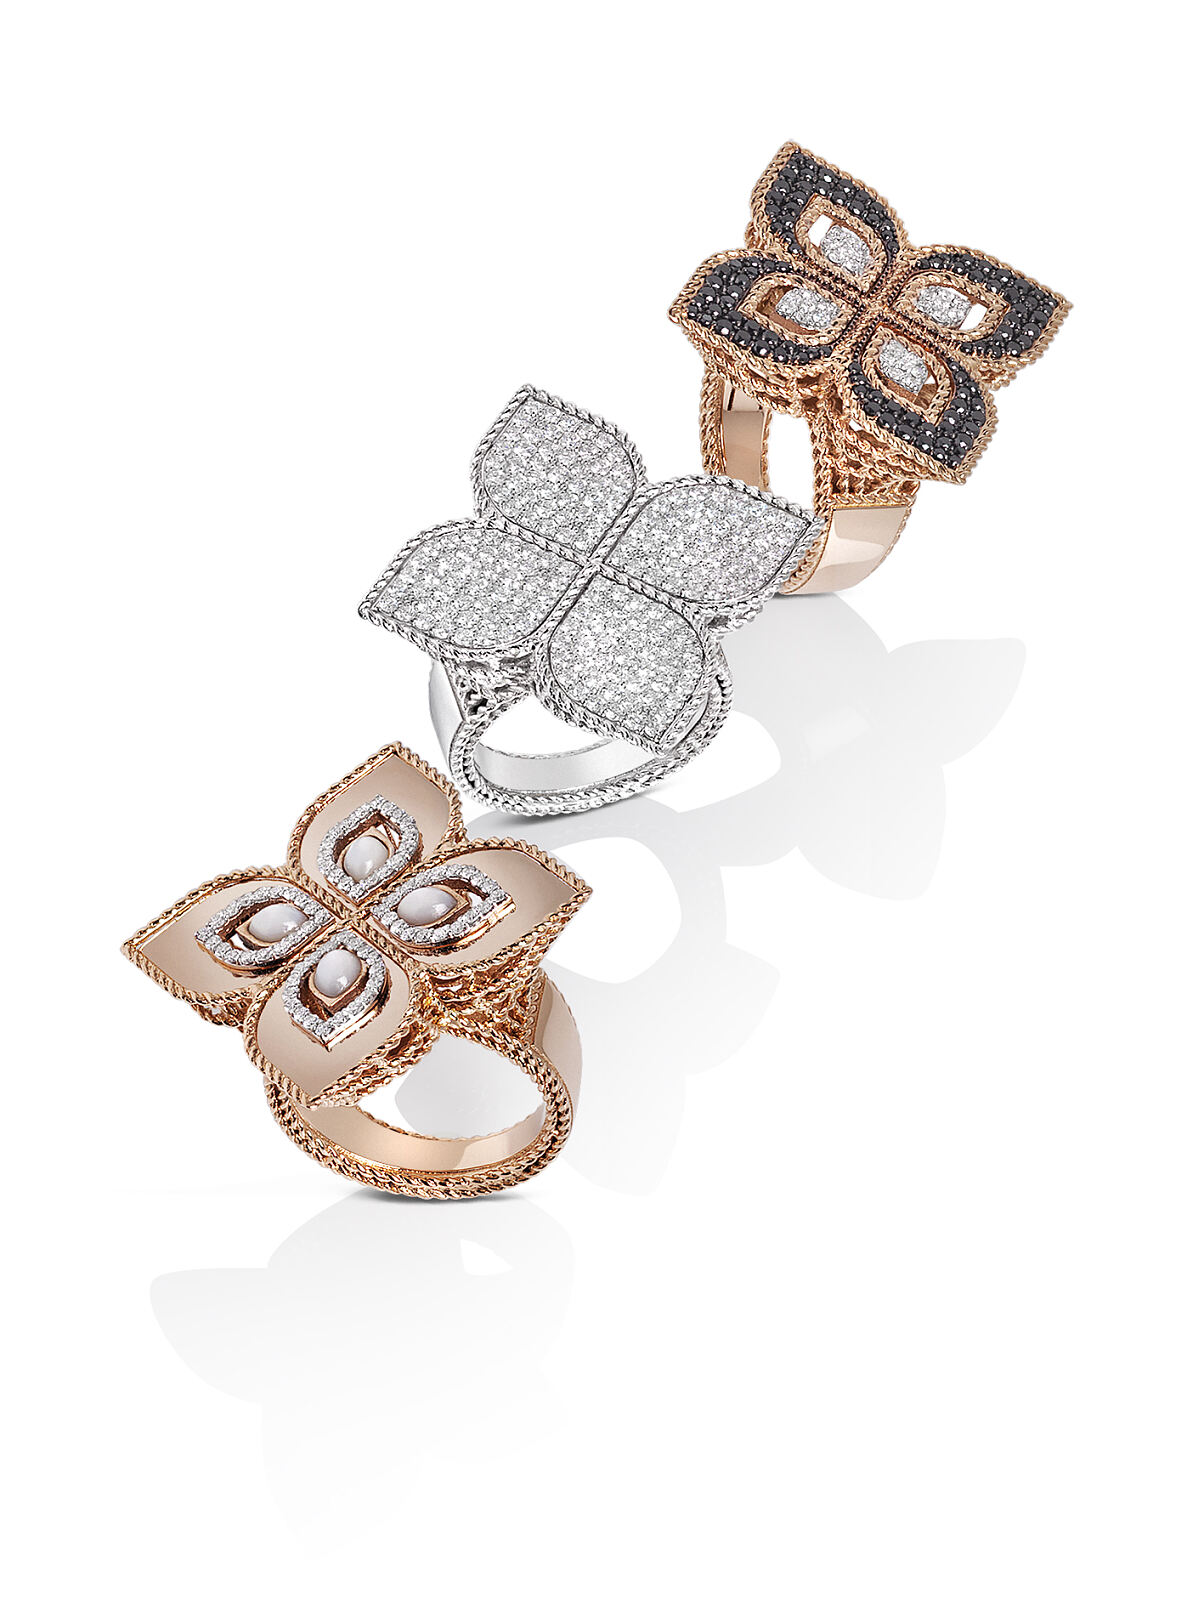 JUWELIER KRUZIK_Roberto Coin_Kollektion Princess Flower_Rings in rose and white gold with mother of pearl and diamonds and with white and black diamond pavé_Preis auf Anfrage